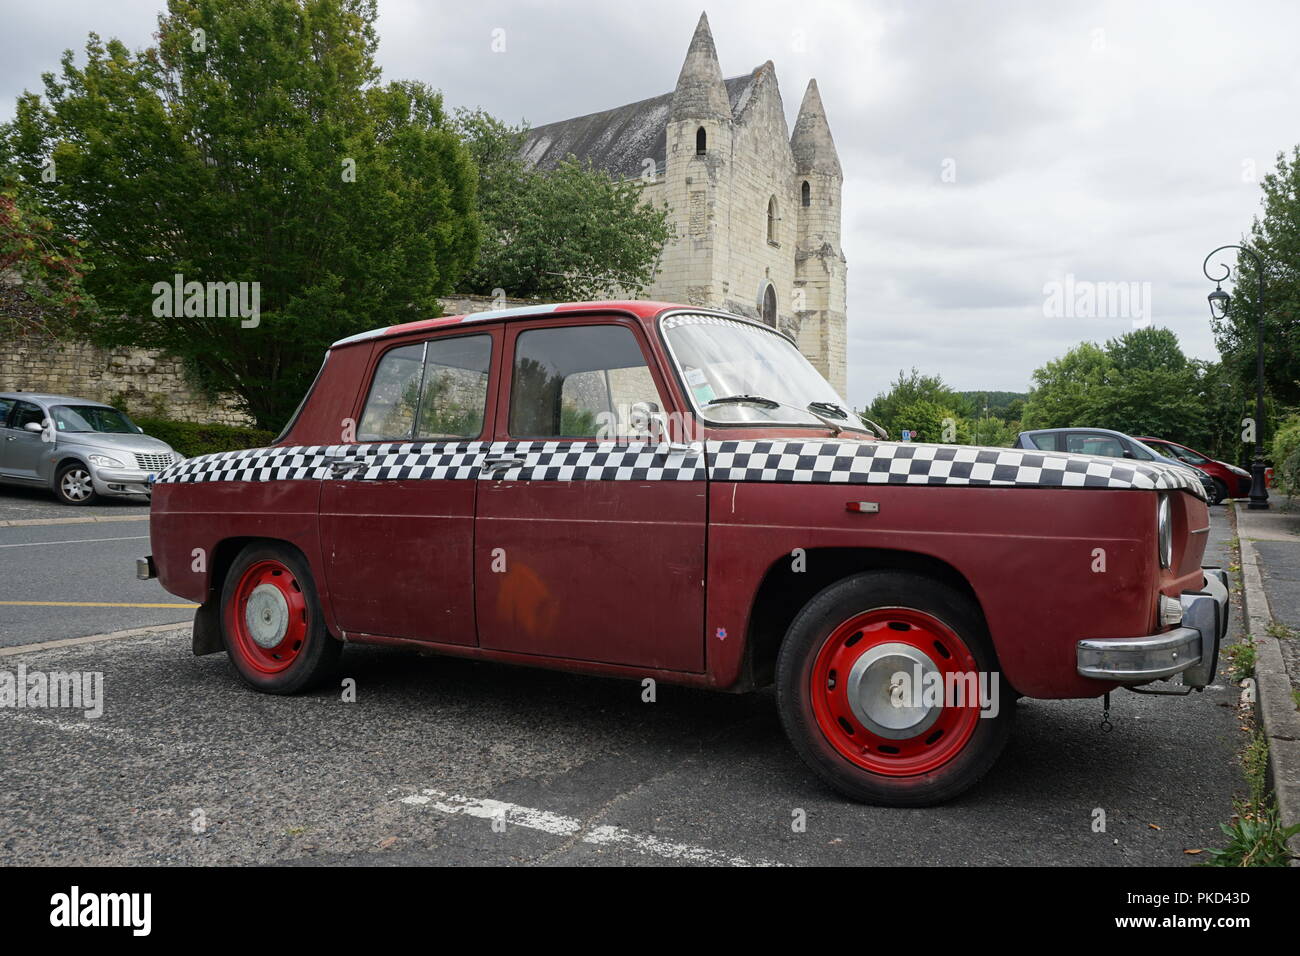 Old vintage red car with black and white checkers paintings parked by an old stone church in a small Loire Valley village Stock Photo